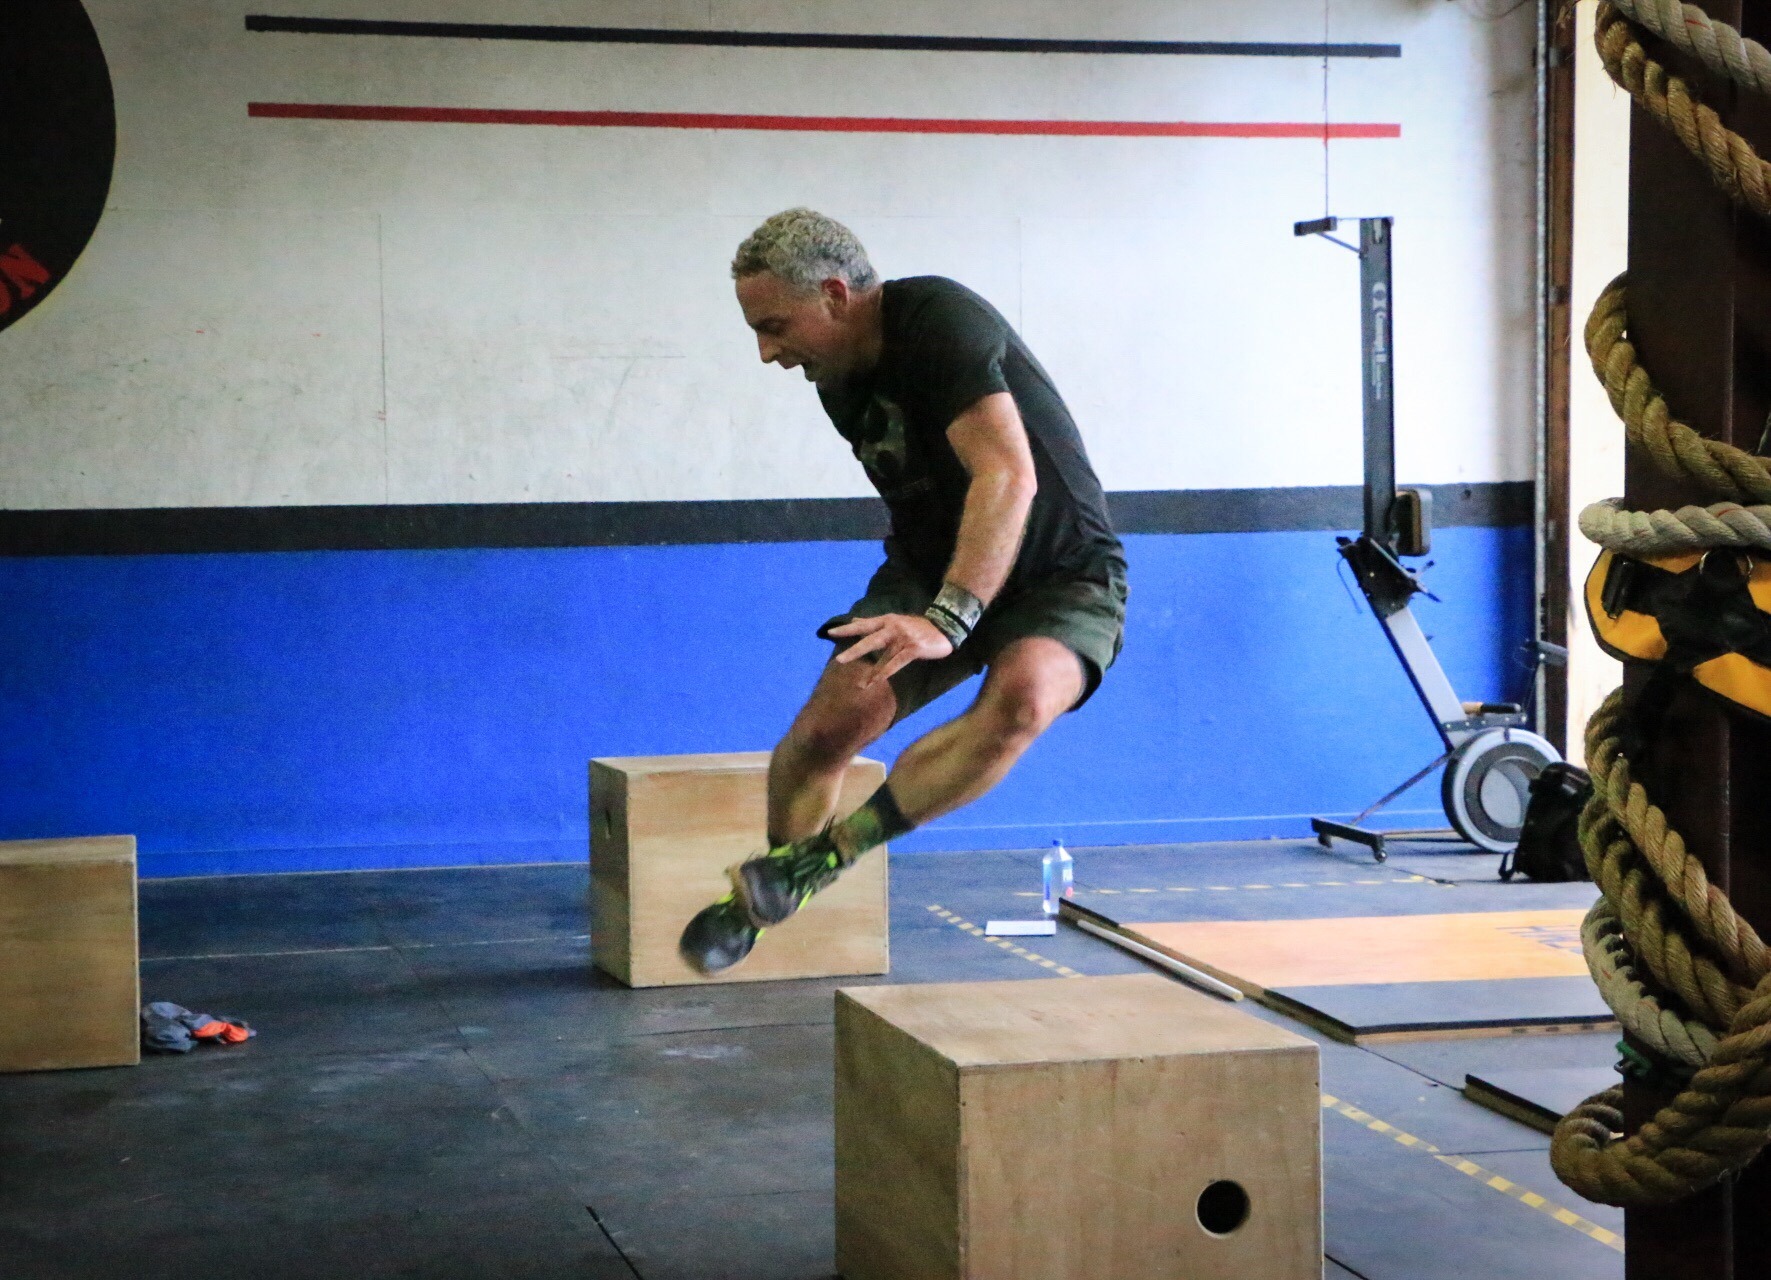 Add the Box Jump to Your Routine to Power Up